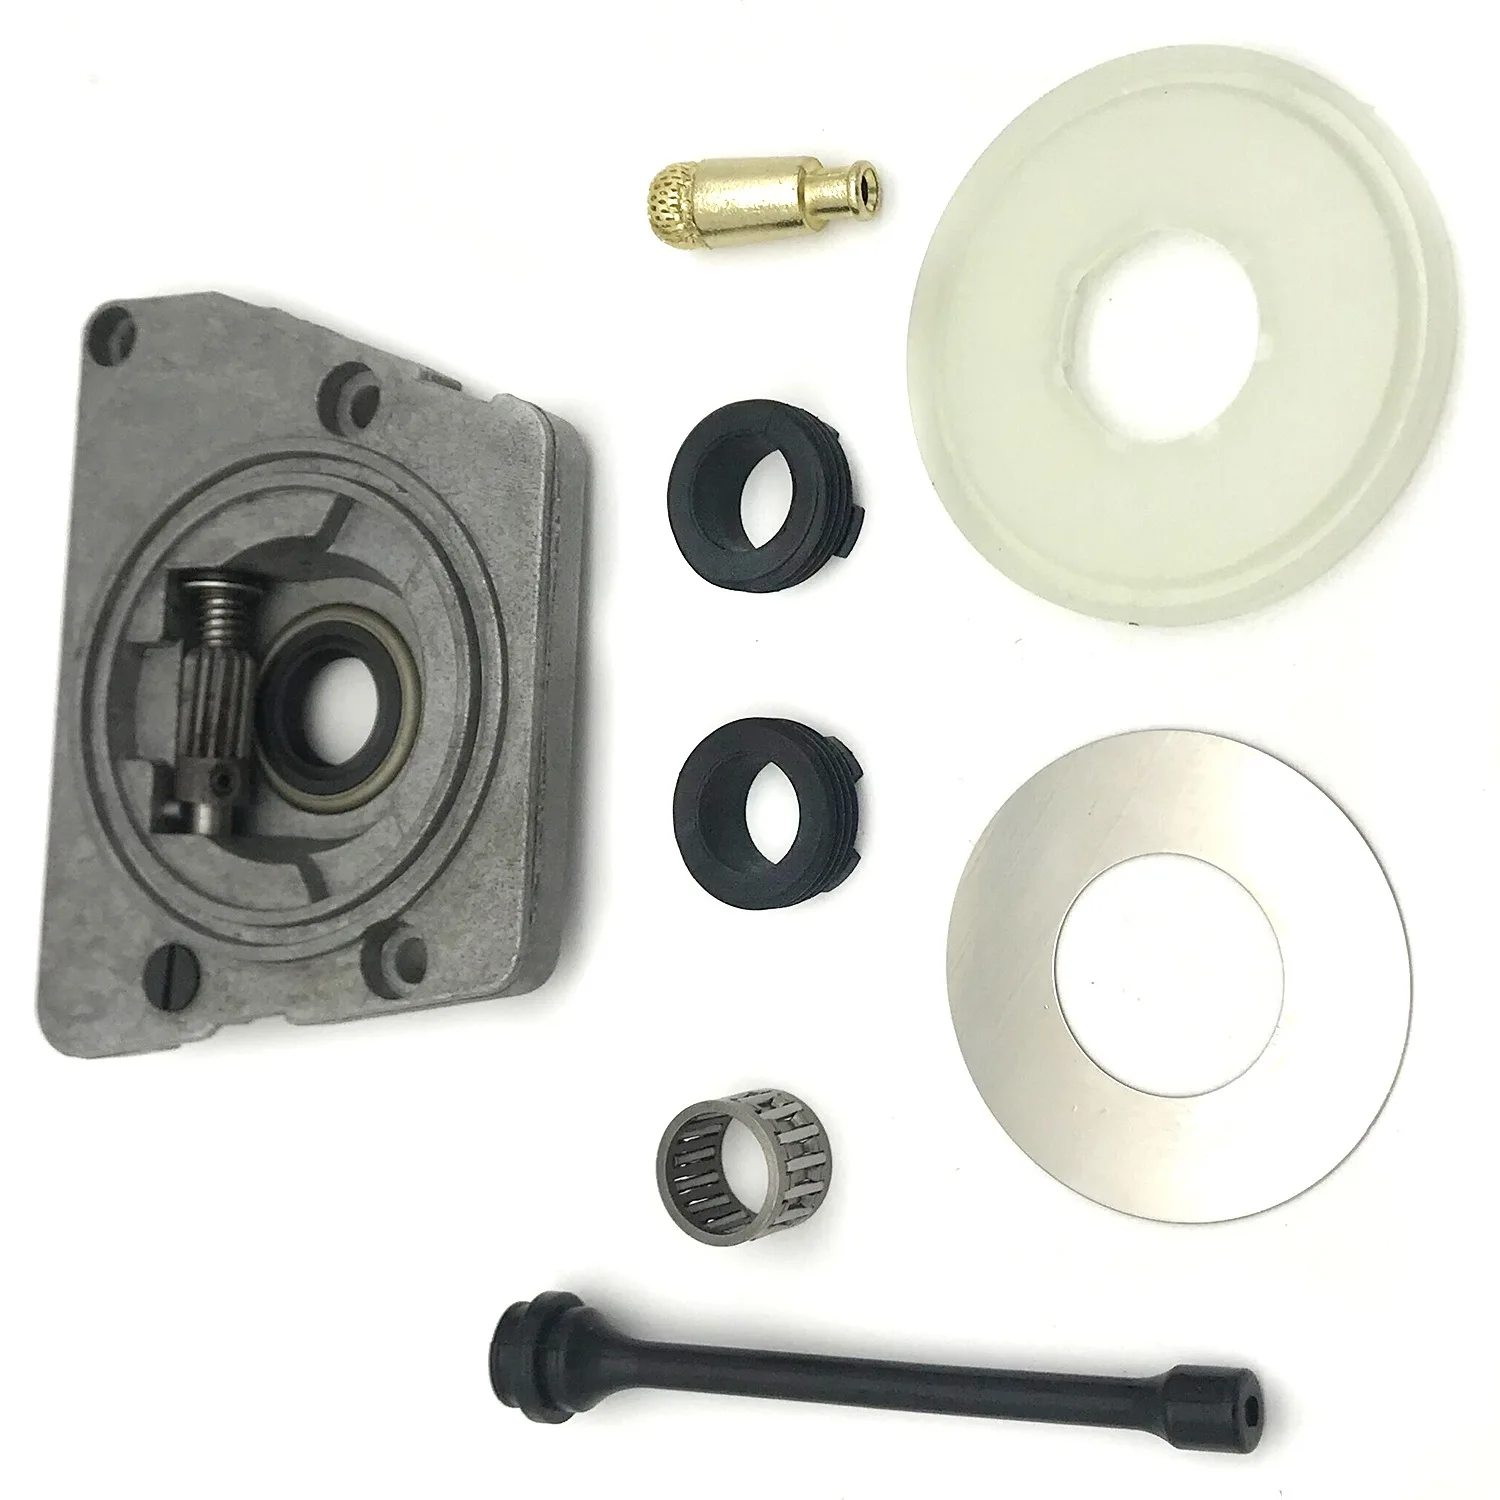 

Oil Pump Worm Gear Dust Washer Hose Filter Kit Fit for HUSQVARNA 61 66 266 268 272 XP 266XP 268XP 272XP Chainsaw Parts